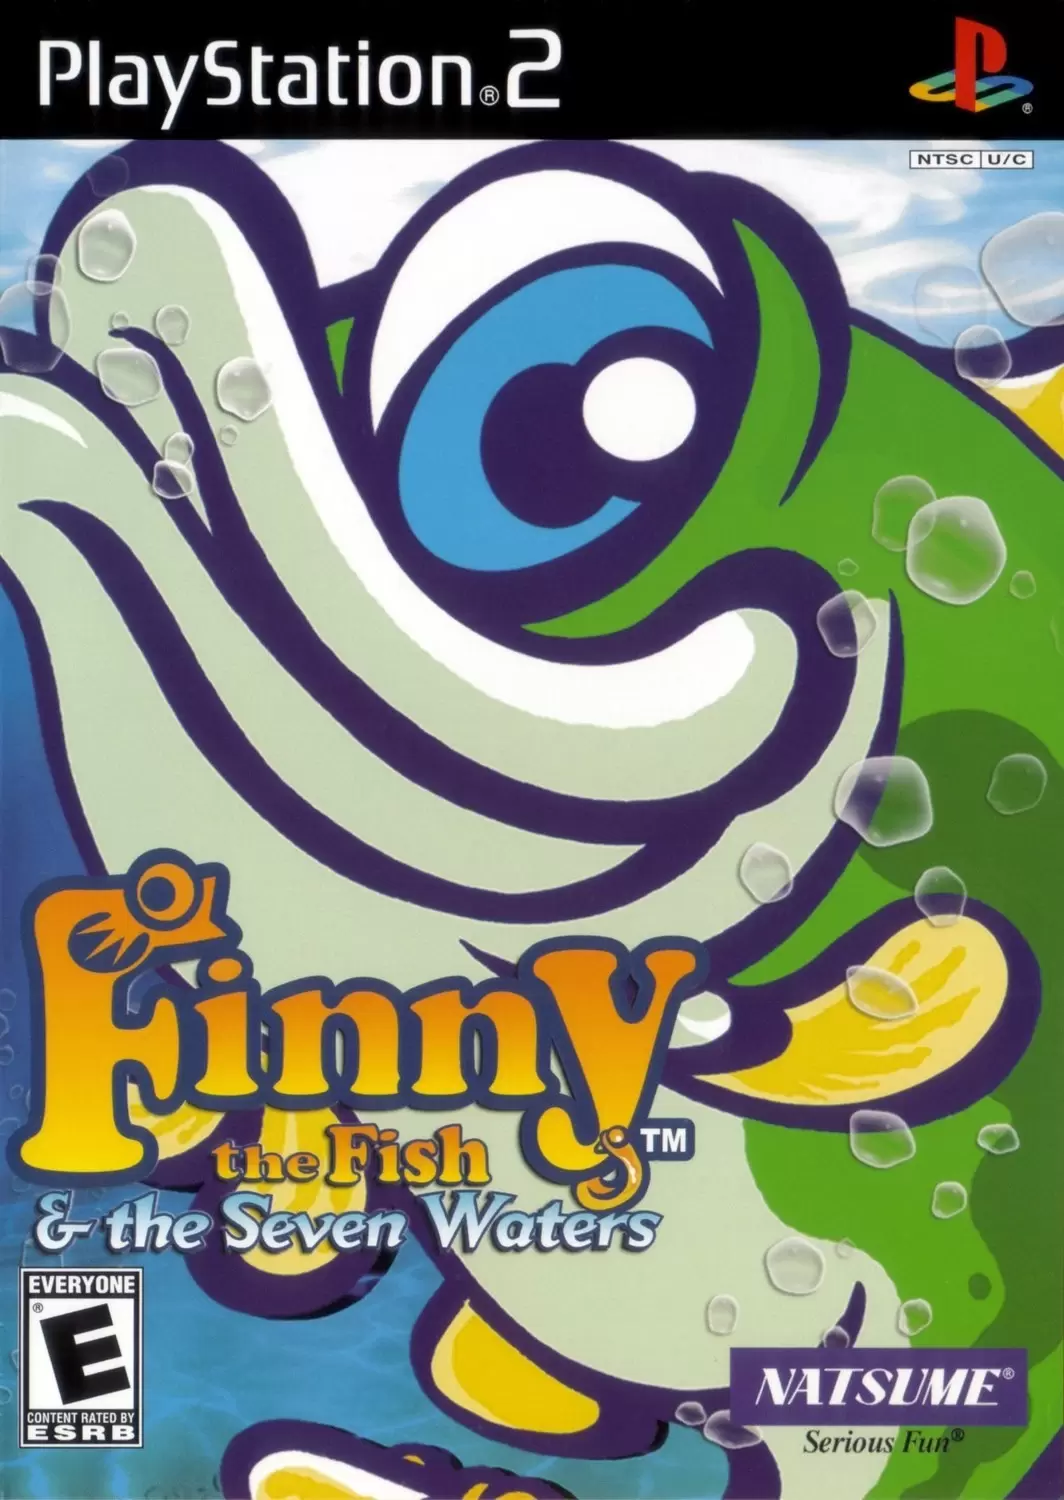 PS2 Games - Finny The Fish & The Seven Waters